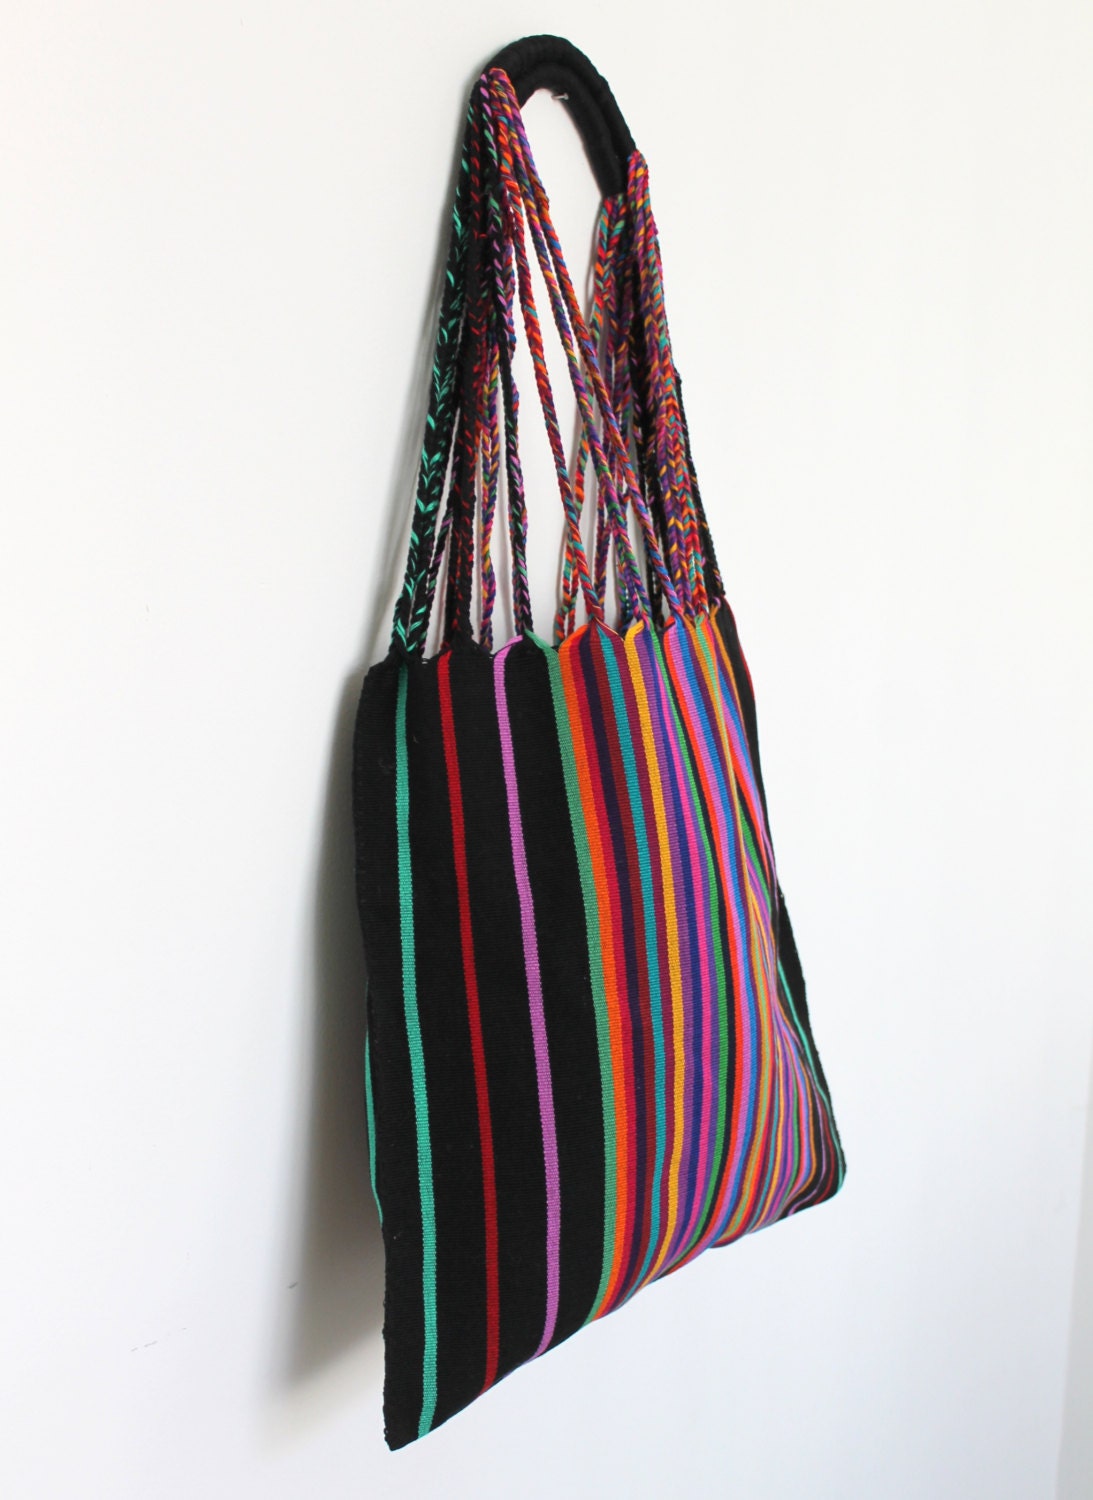 mexican handwoven black bag made in Chiapas / embroidered tote